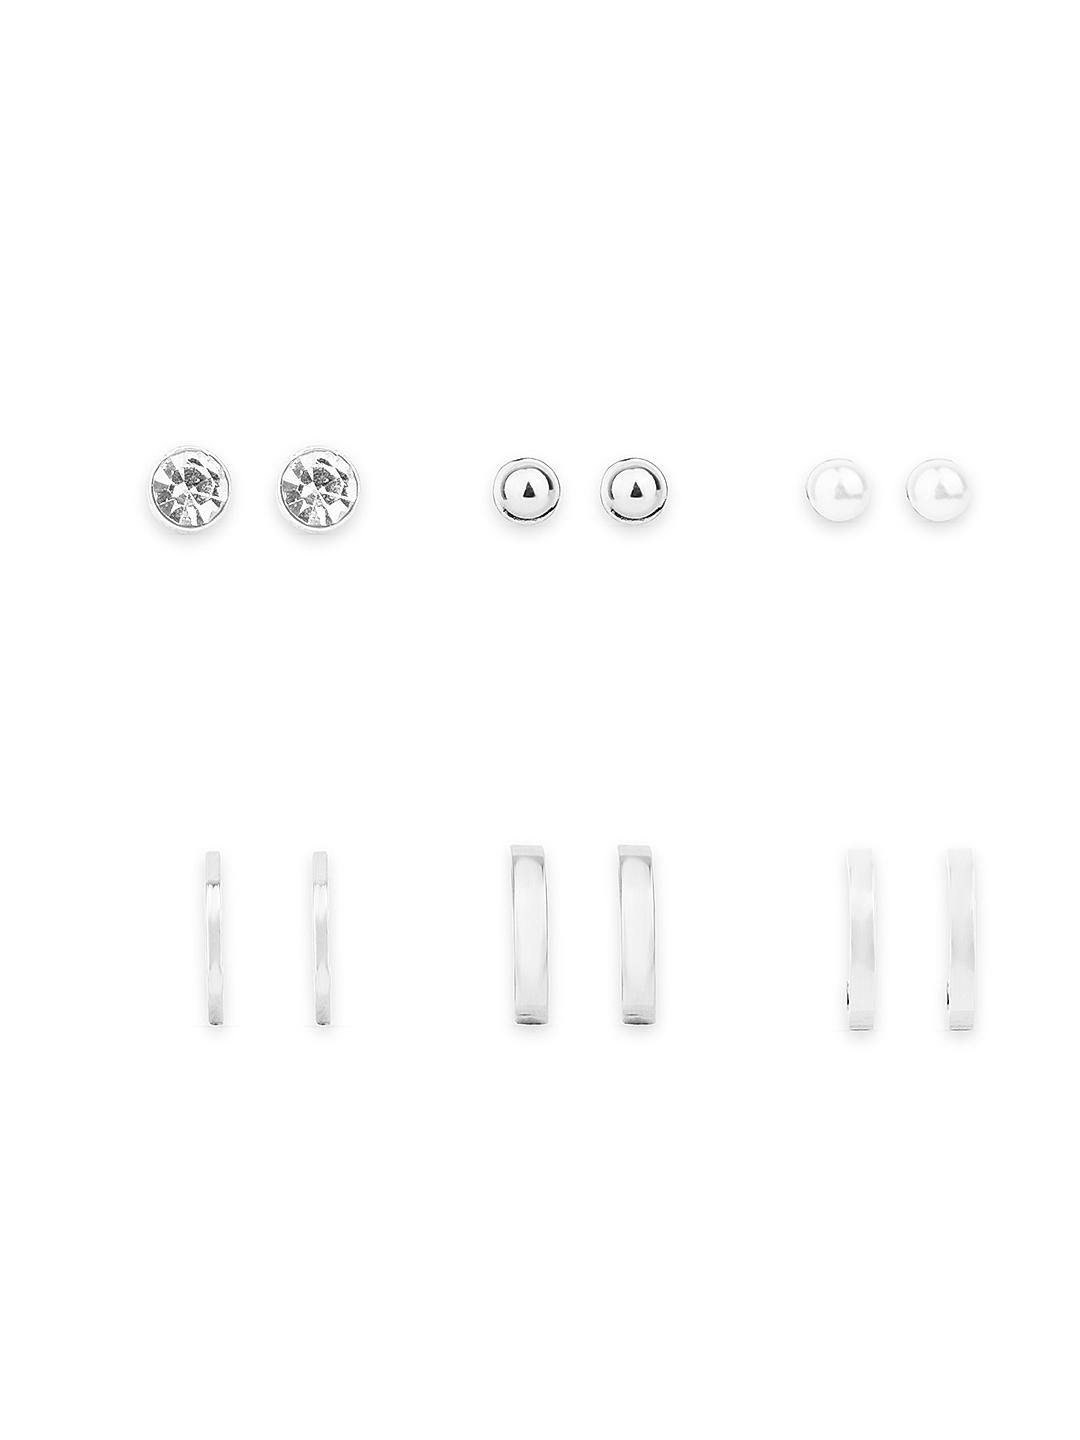 Buy sterling silver AD solitaire earring studs for women